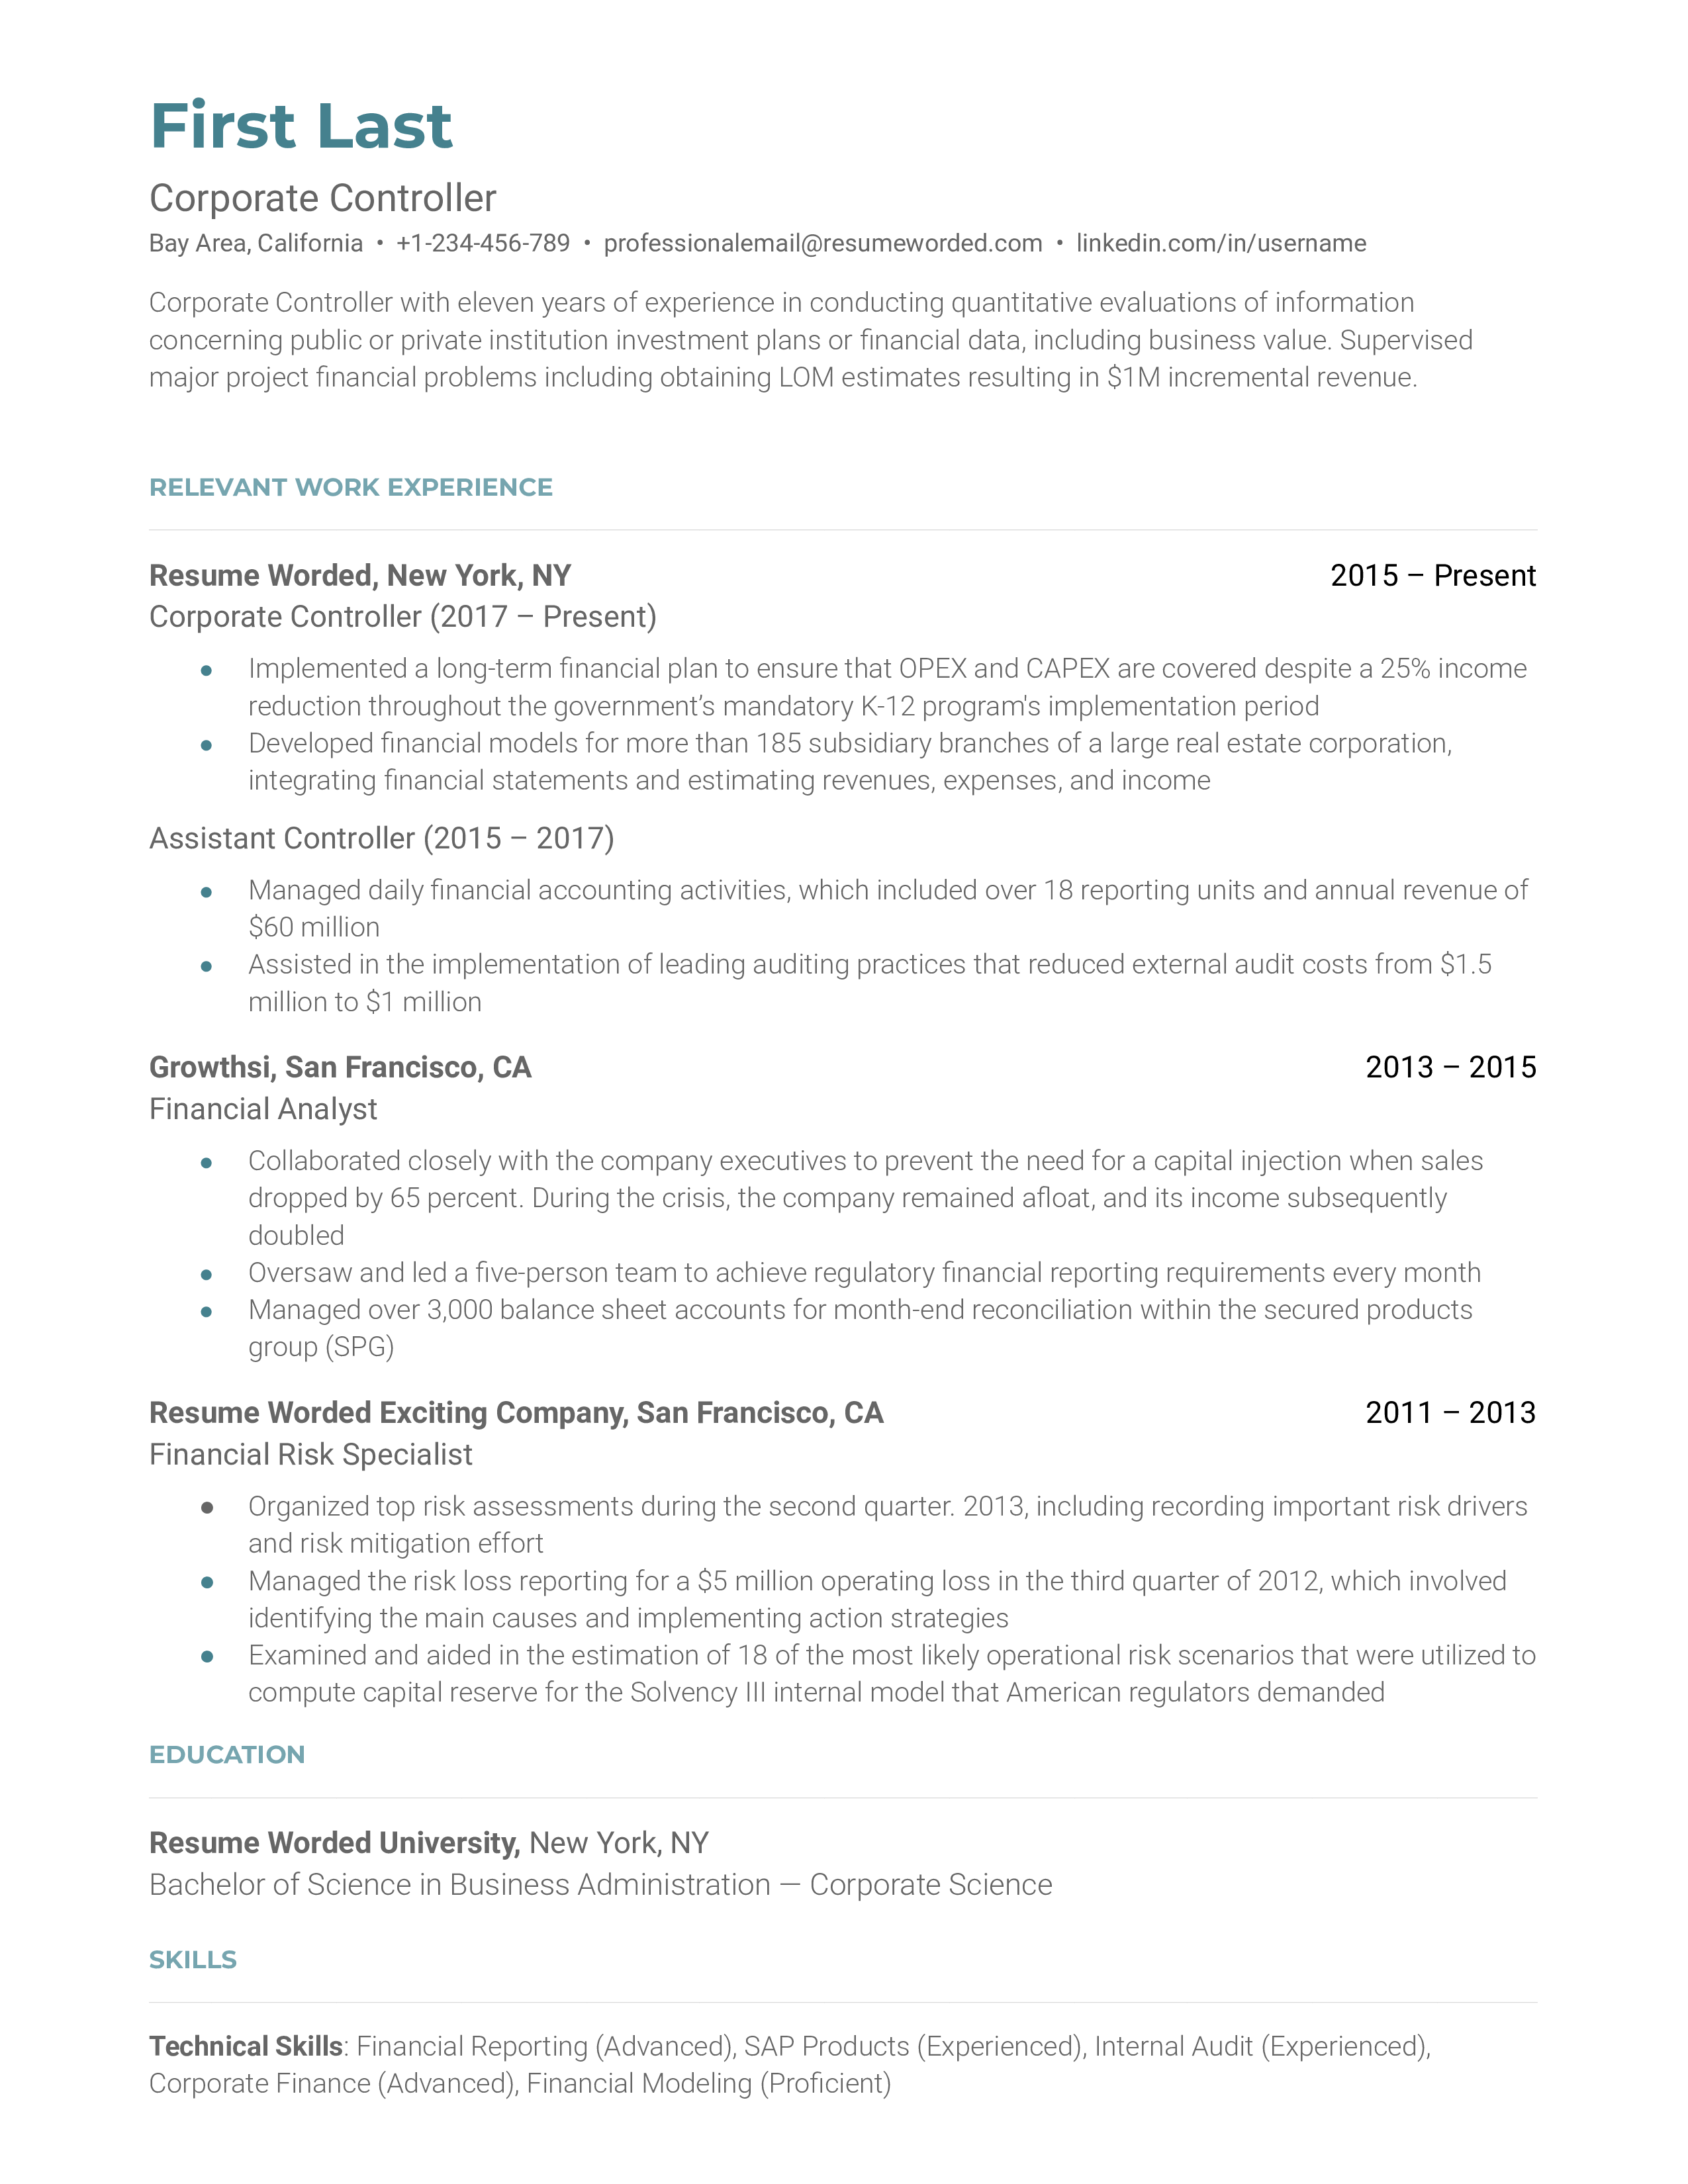 A strong corporate controller resume sample that highlights the applicant's organizational and technical skills.